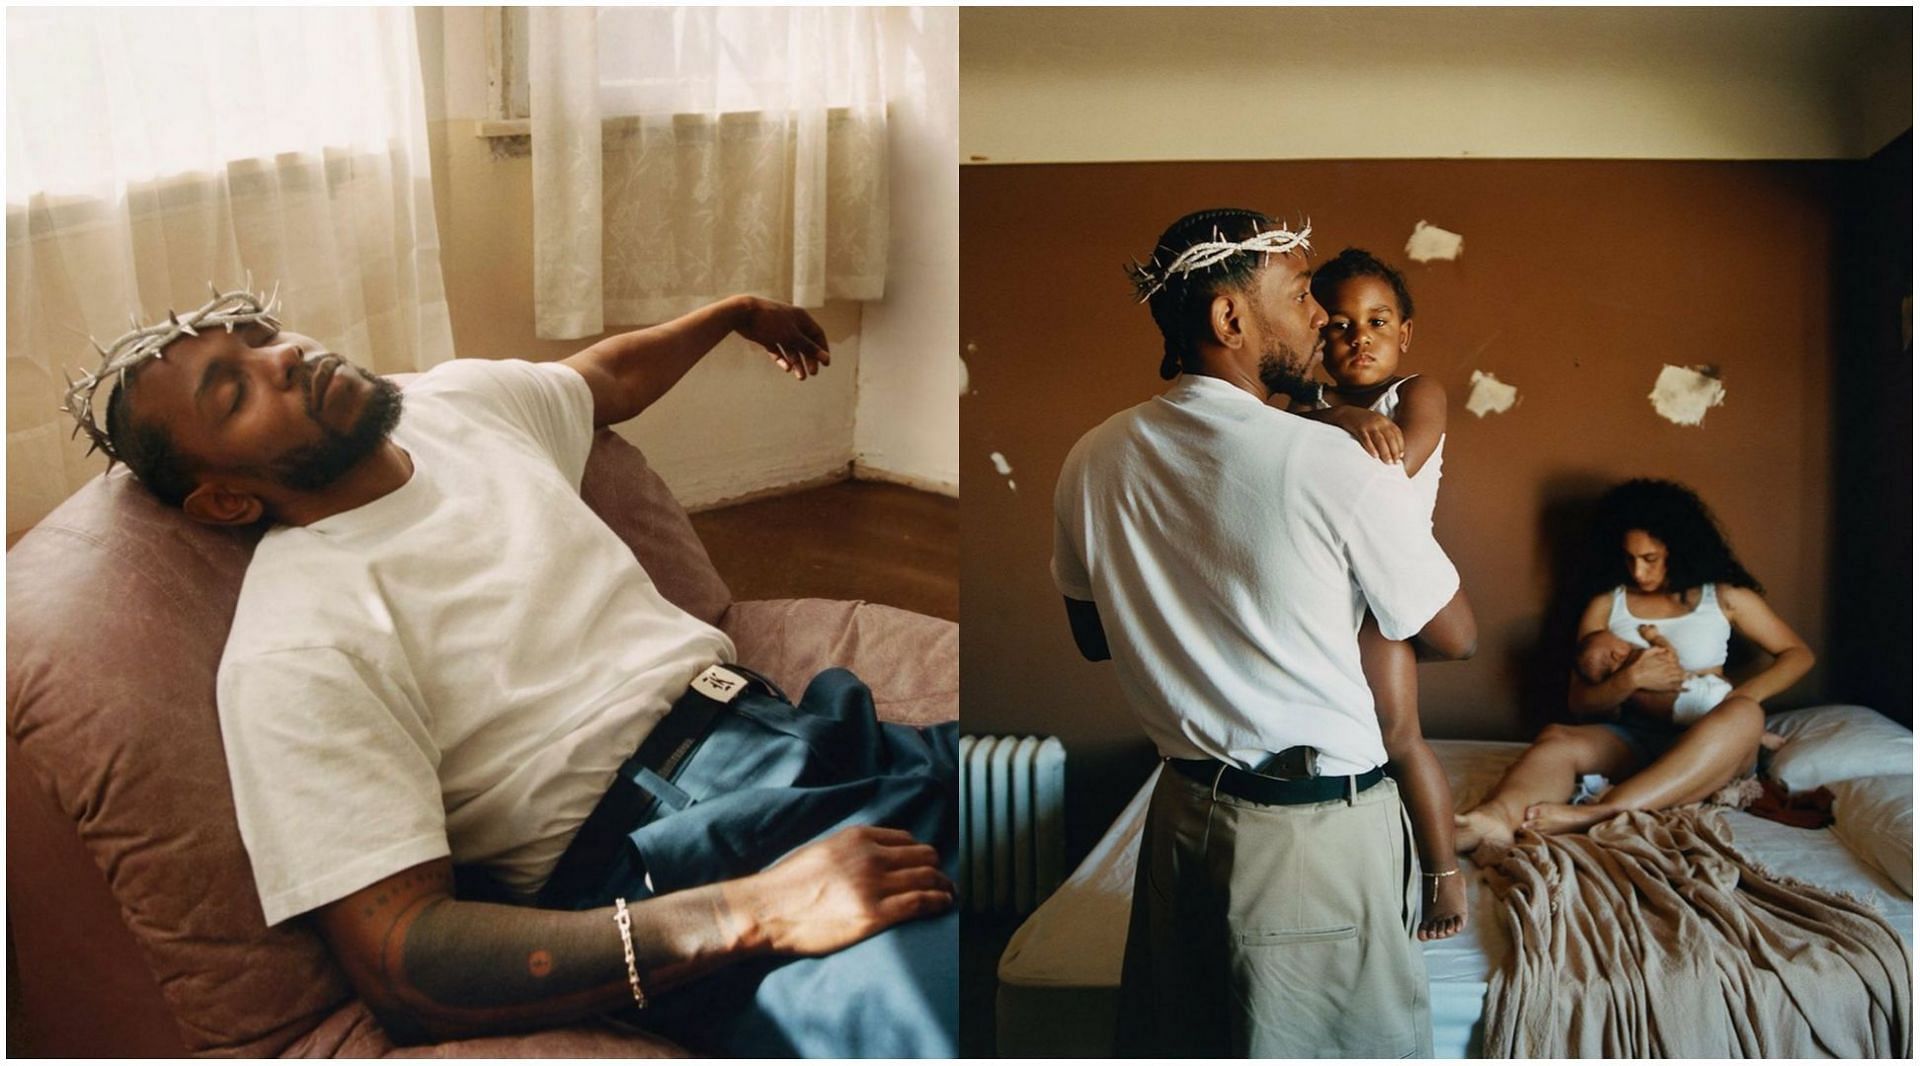 Mr. Morale &amp; The Big Steppers: Album Cover and Photoshoot (Images via Instagram/@kendricklamar)